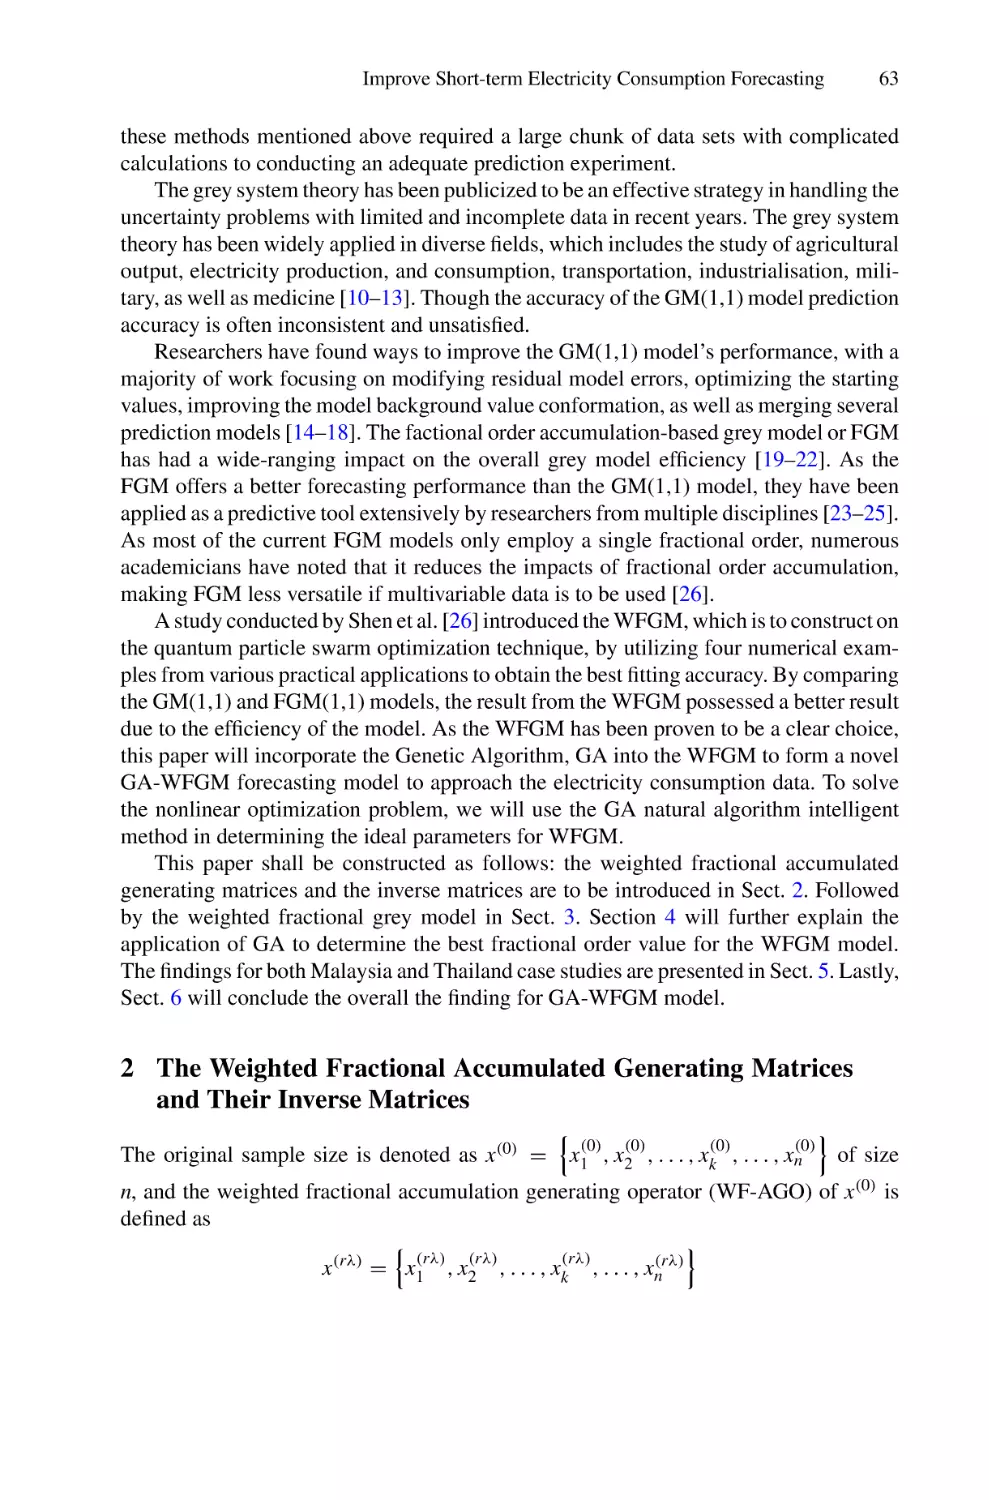 2 The Weighted Fractional Accumulated Generating Matrices and Their Inverse Matrices